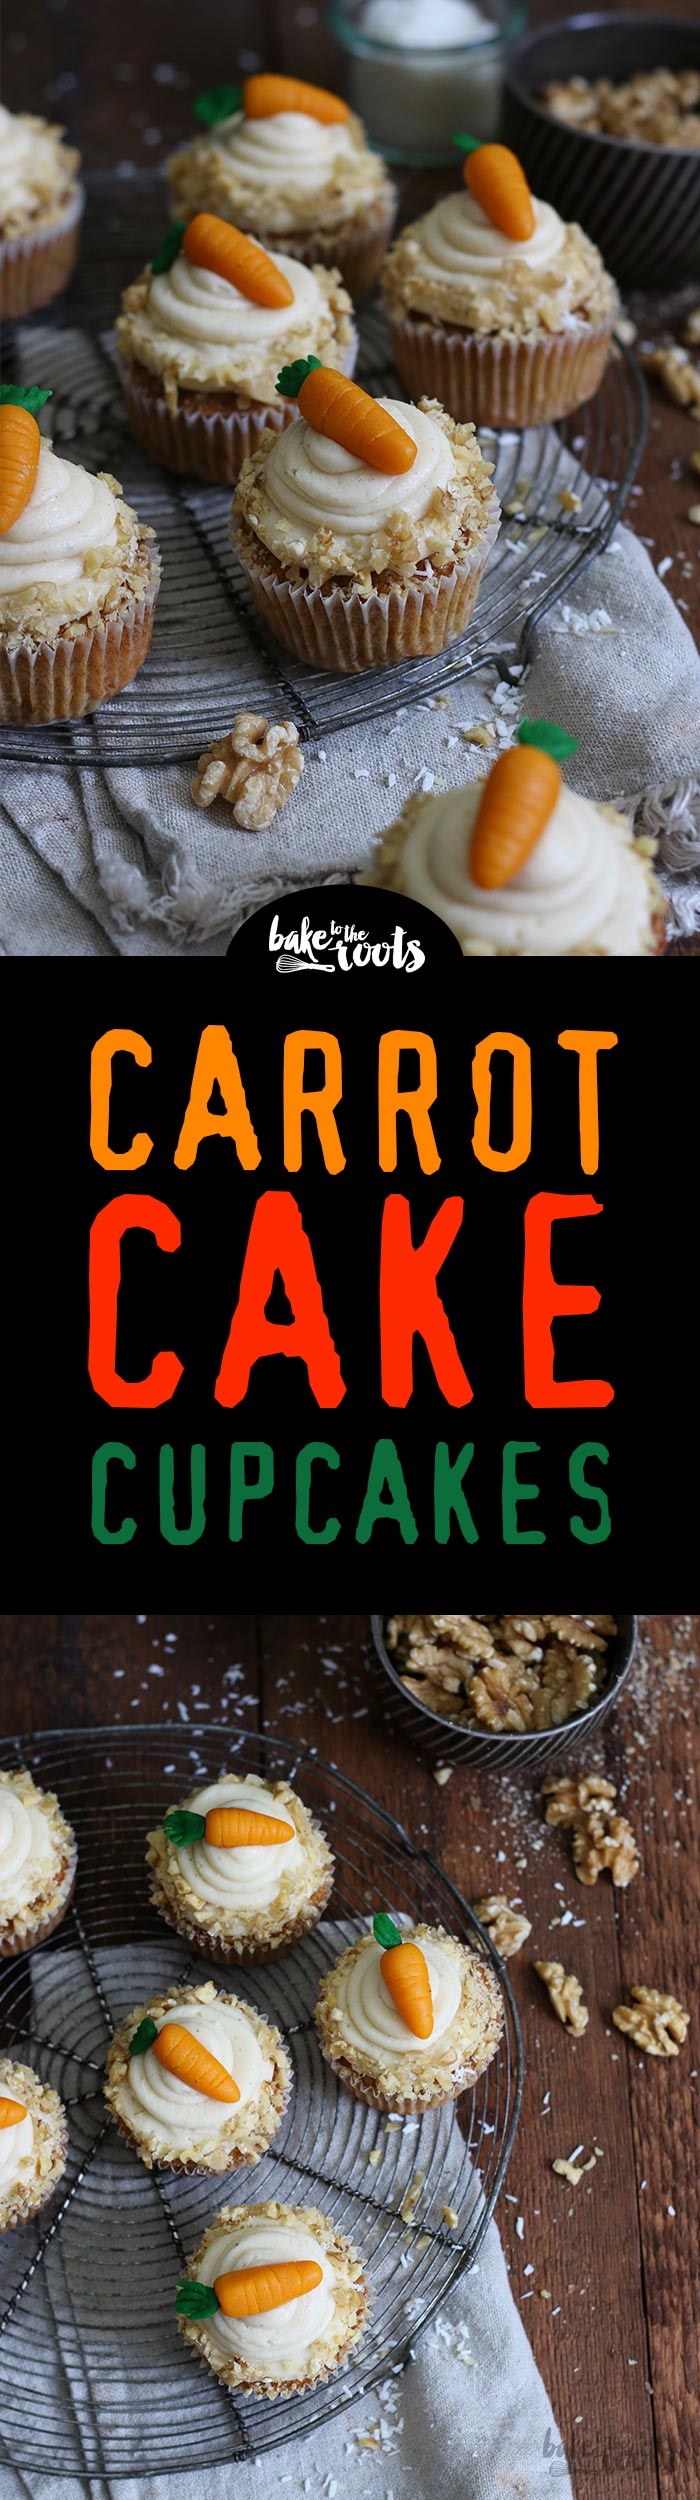 Delicious Carrot Cake Cupcakes with Cream Cheese Frosting and Marzipan Carrots | Bake to the roots